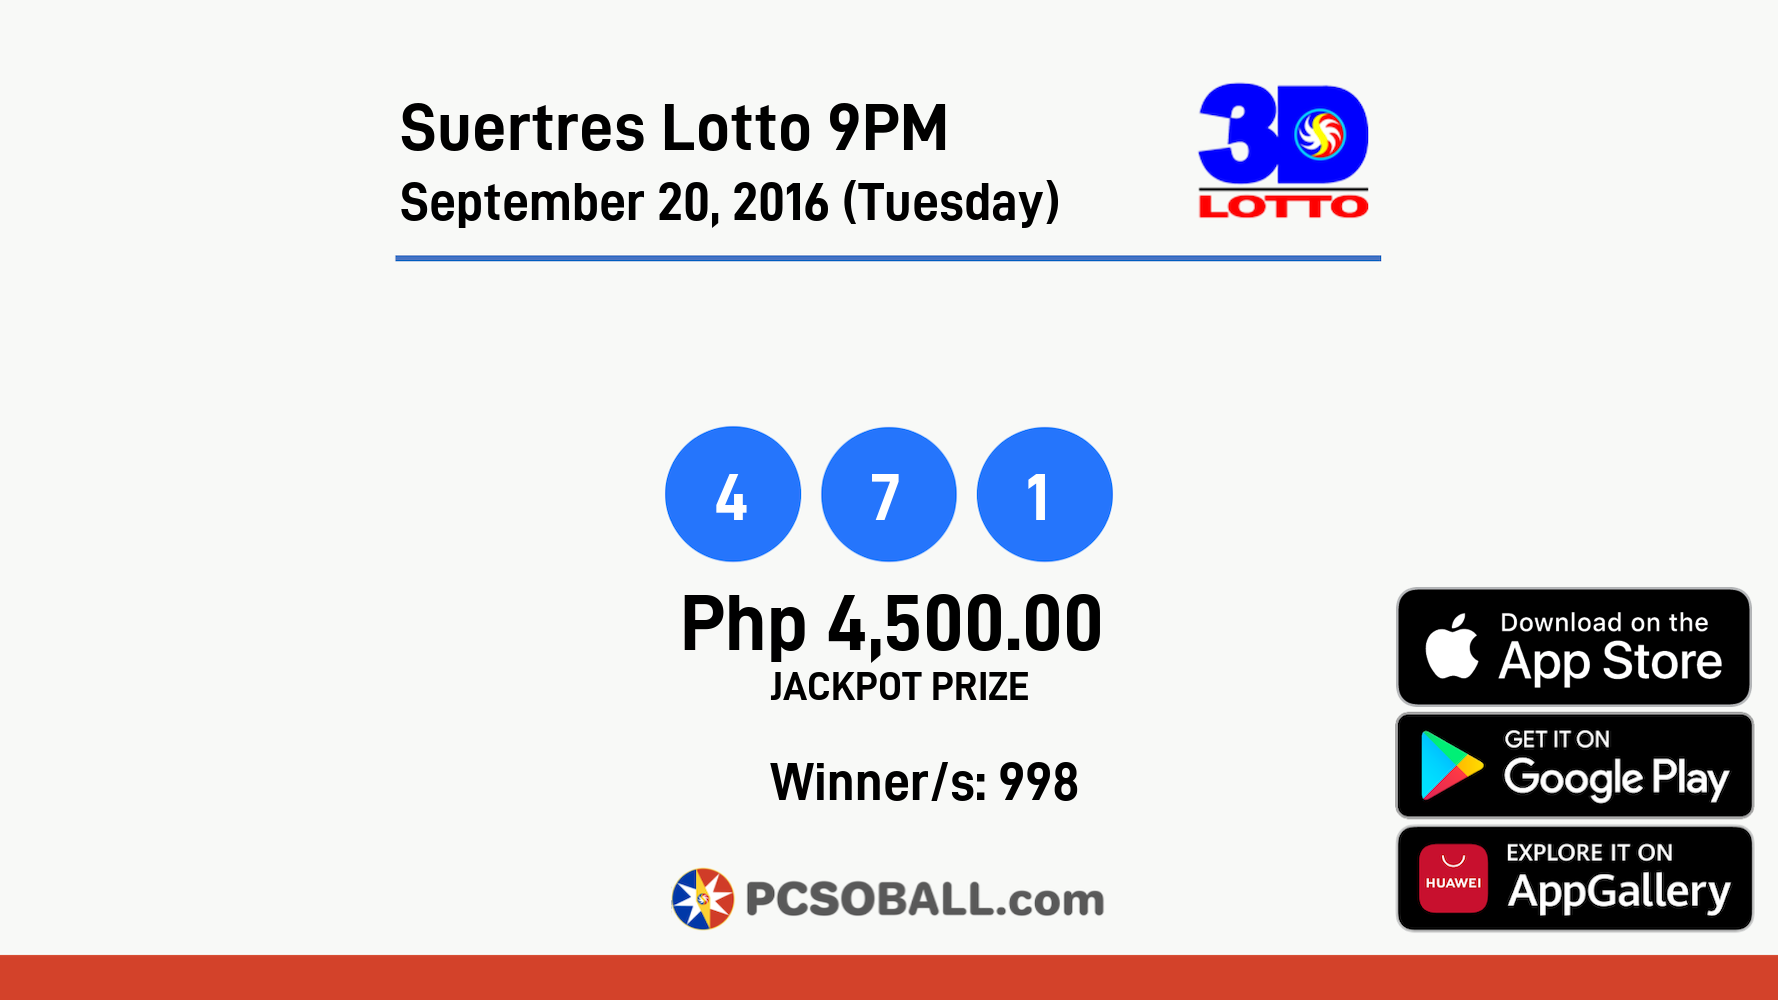 Suertres Lotto 9PM September 20, 2016 (Tuesday) Result